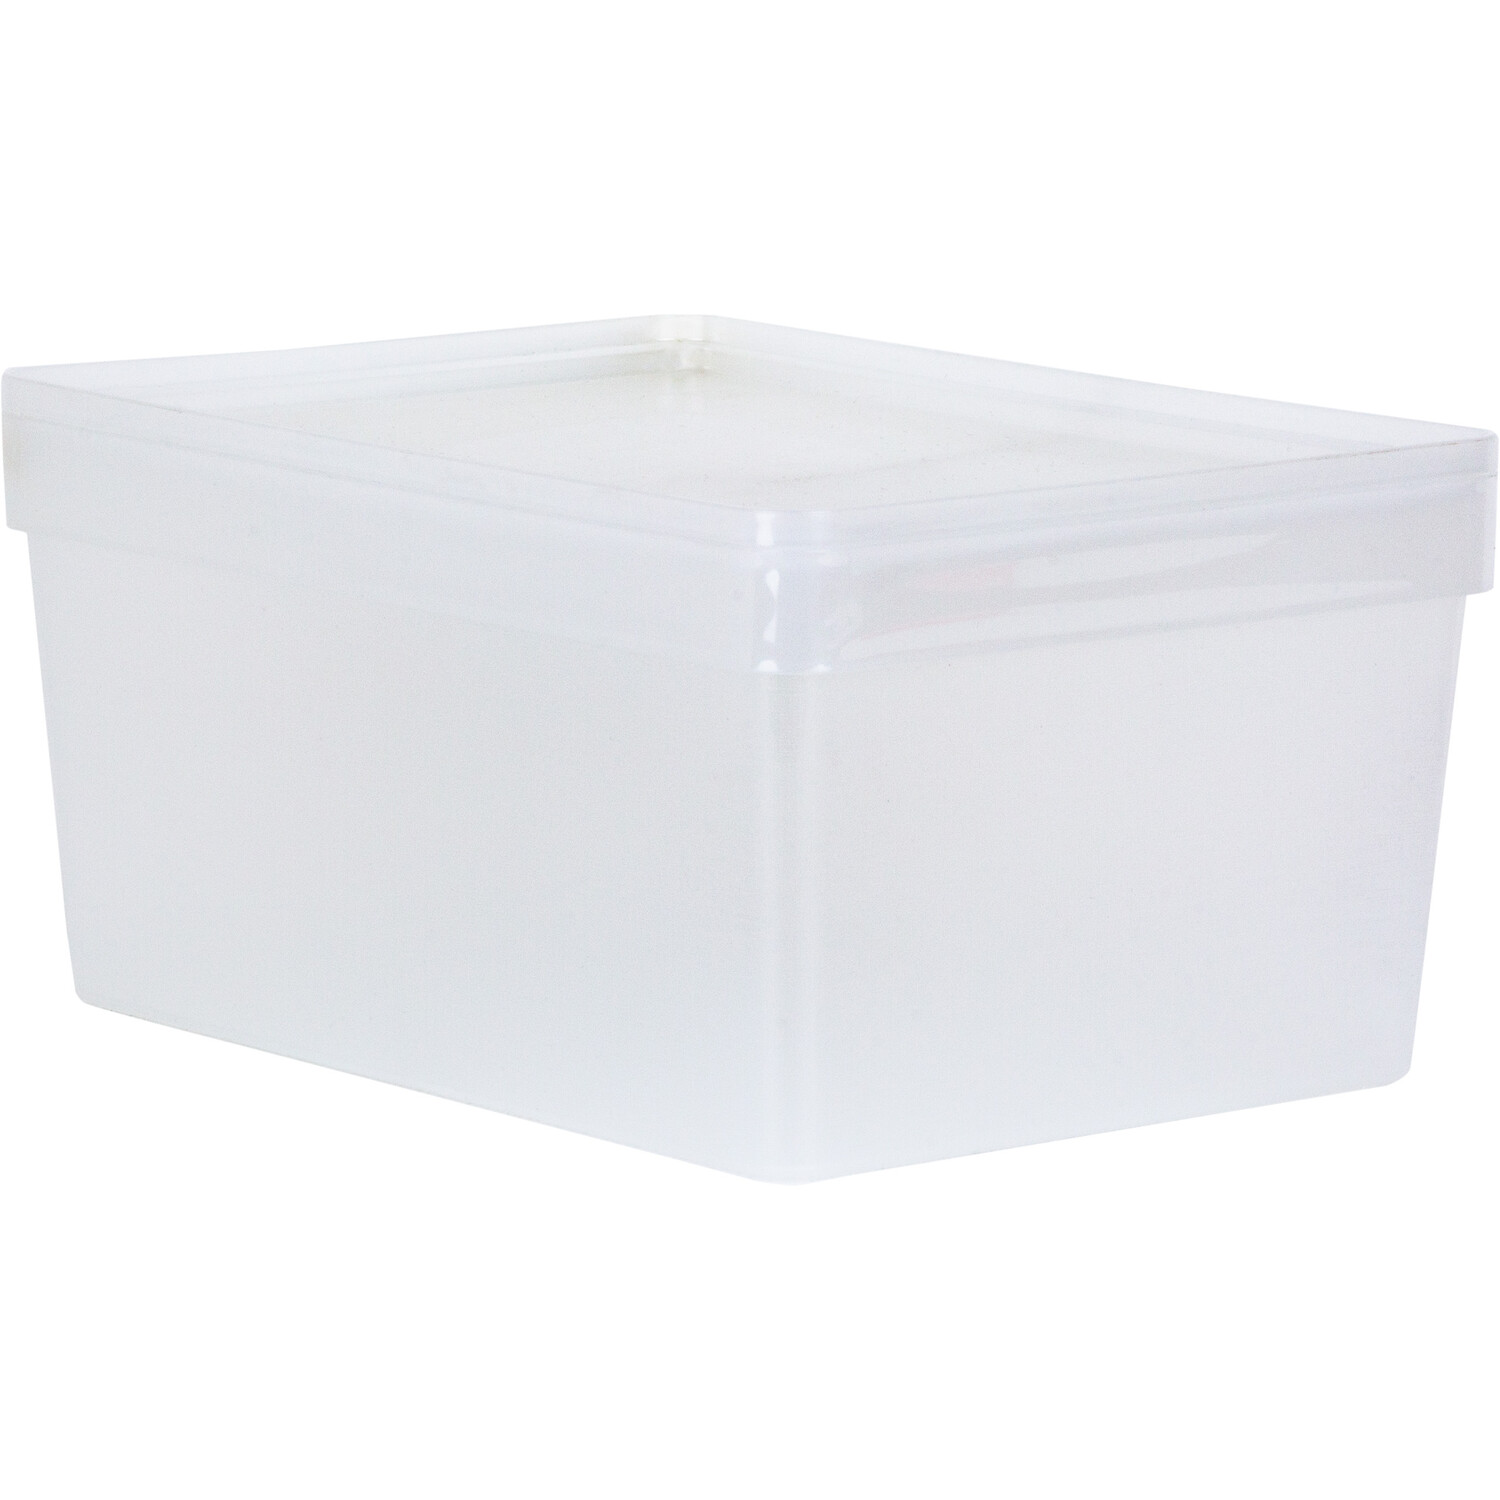 Studio Box and Lid  - Clear / 17cm Image 2